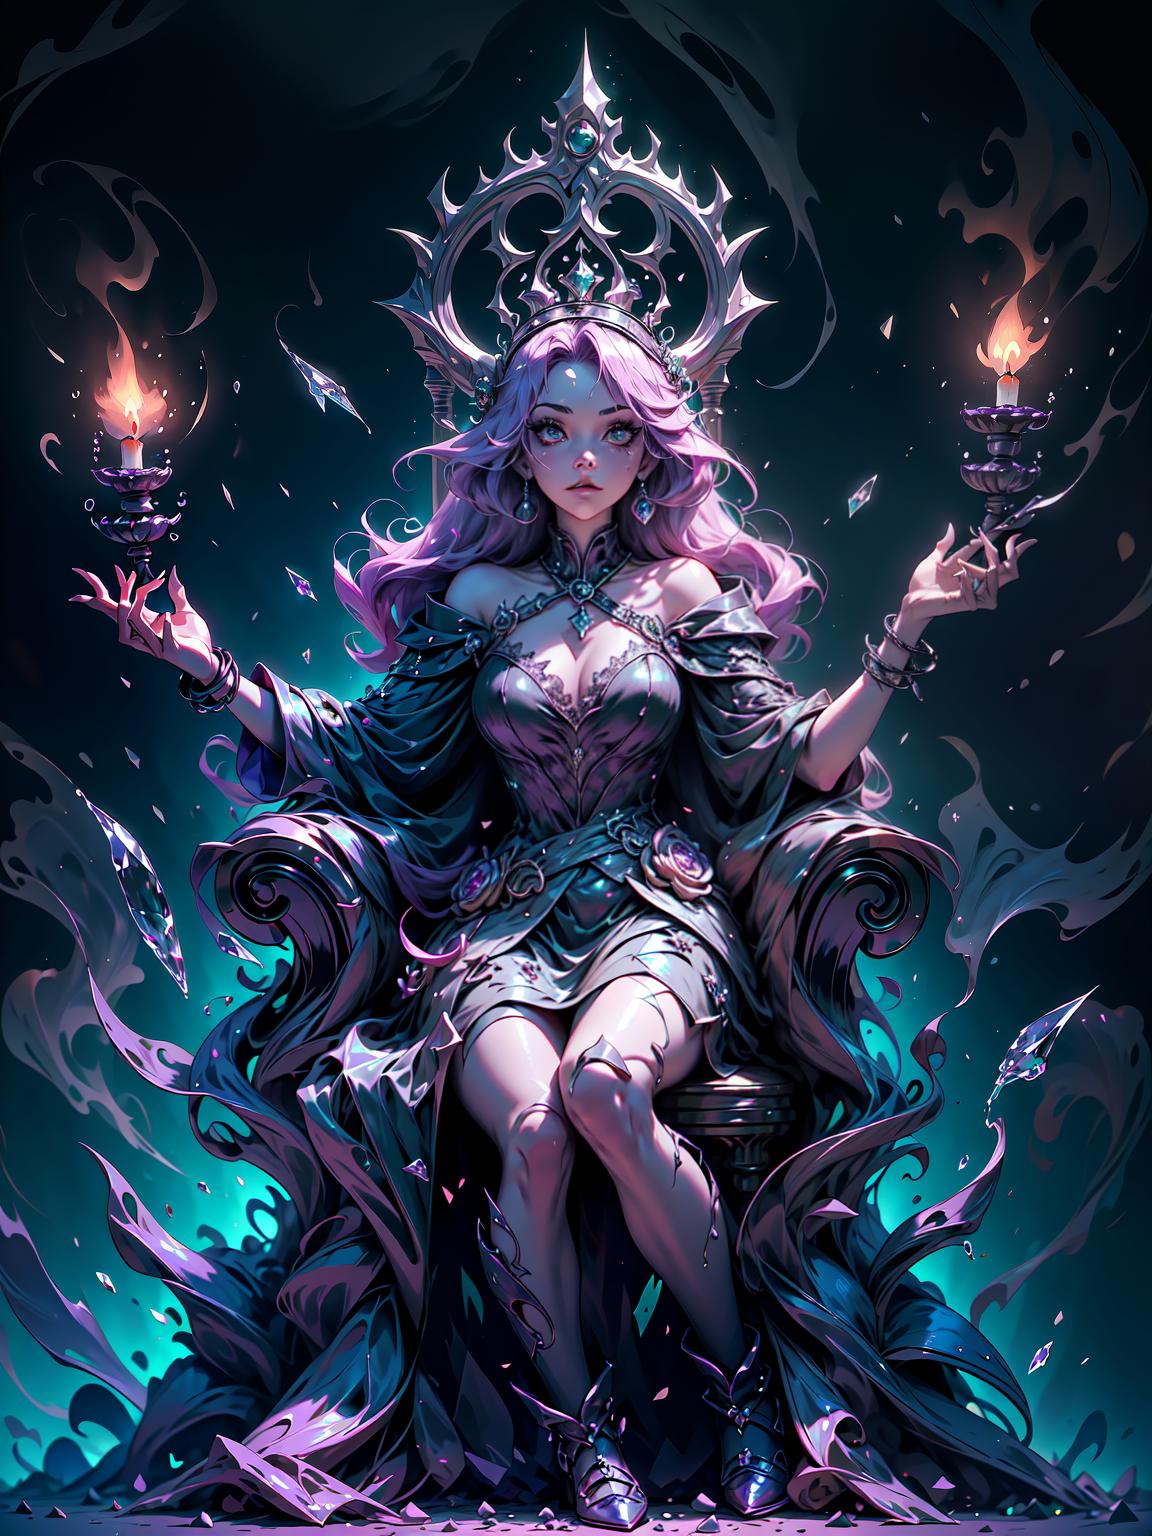  master piece, best quality, ultra detailed, highres, 4k.8k, Queen, Controlling poison, gazing confidently, Confident and commanding, BREAK Dangerous Queen of Poison, Dark throne room, Throne, vials of poison, candlelight, shadows, BREAK Eerie and foreboding, Glowing poison, shadows dancing, crystallineAI,fantasy00d